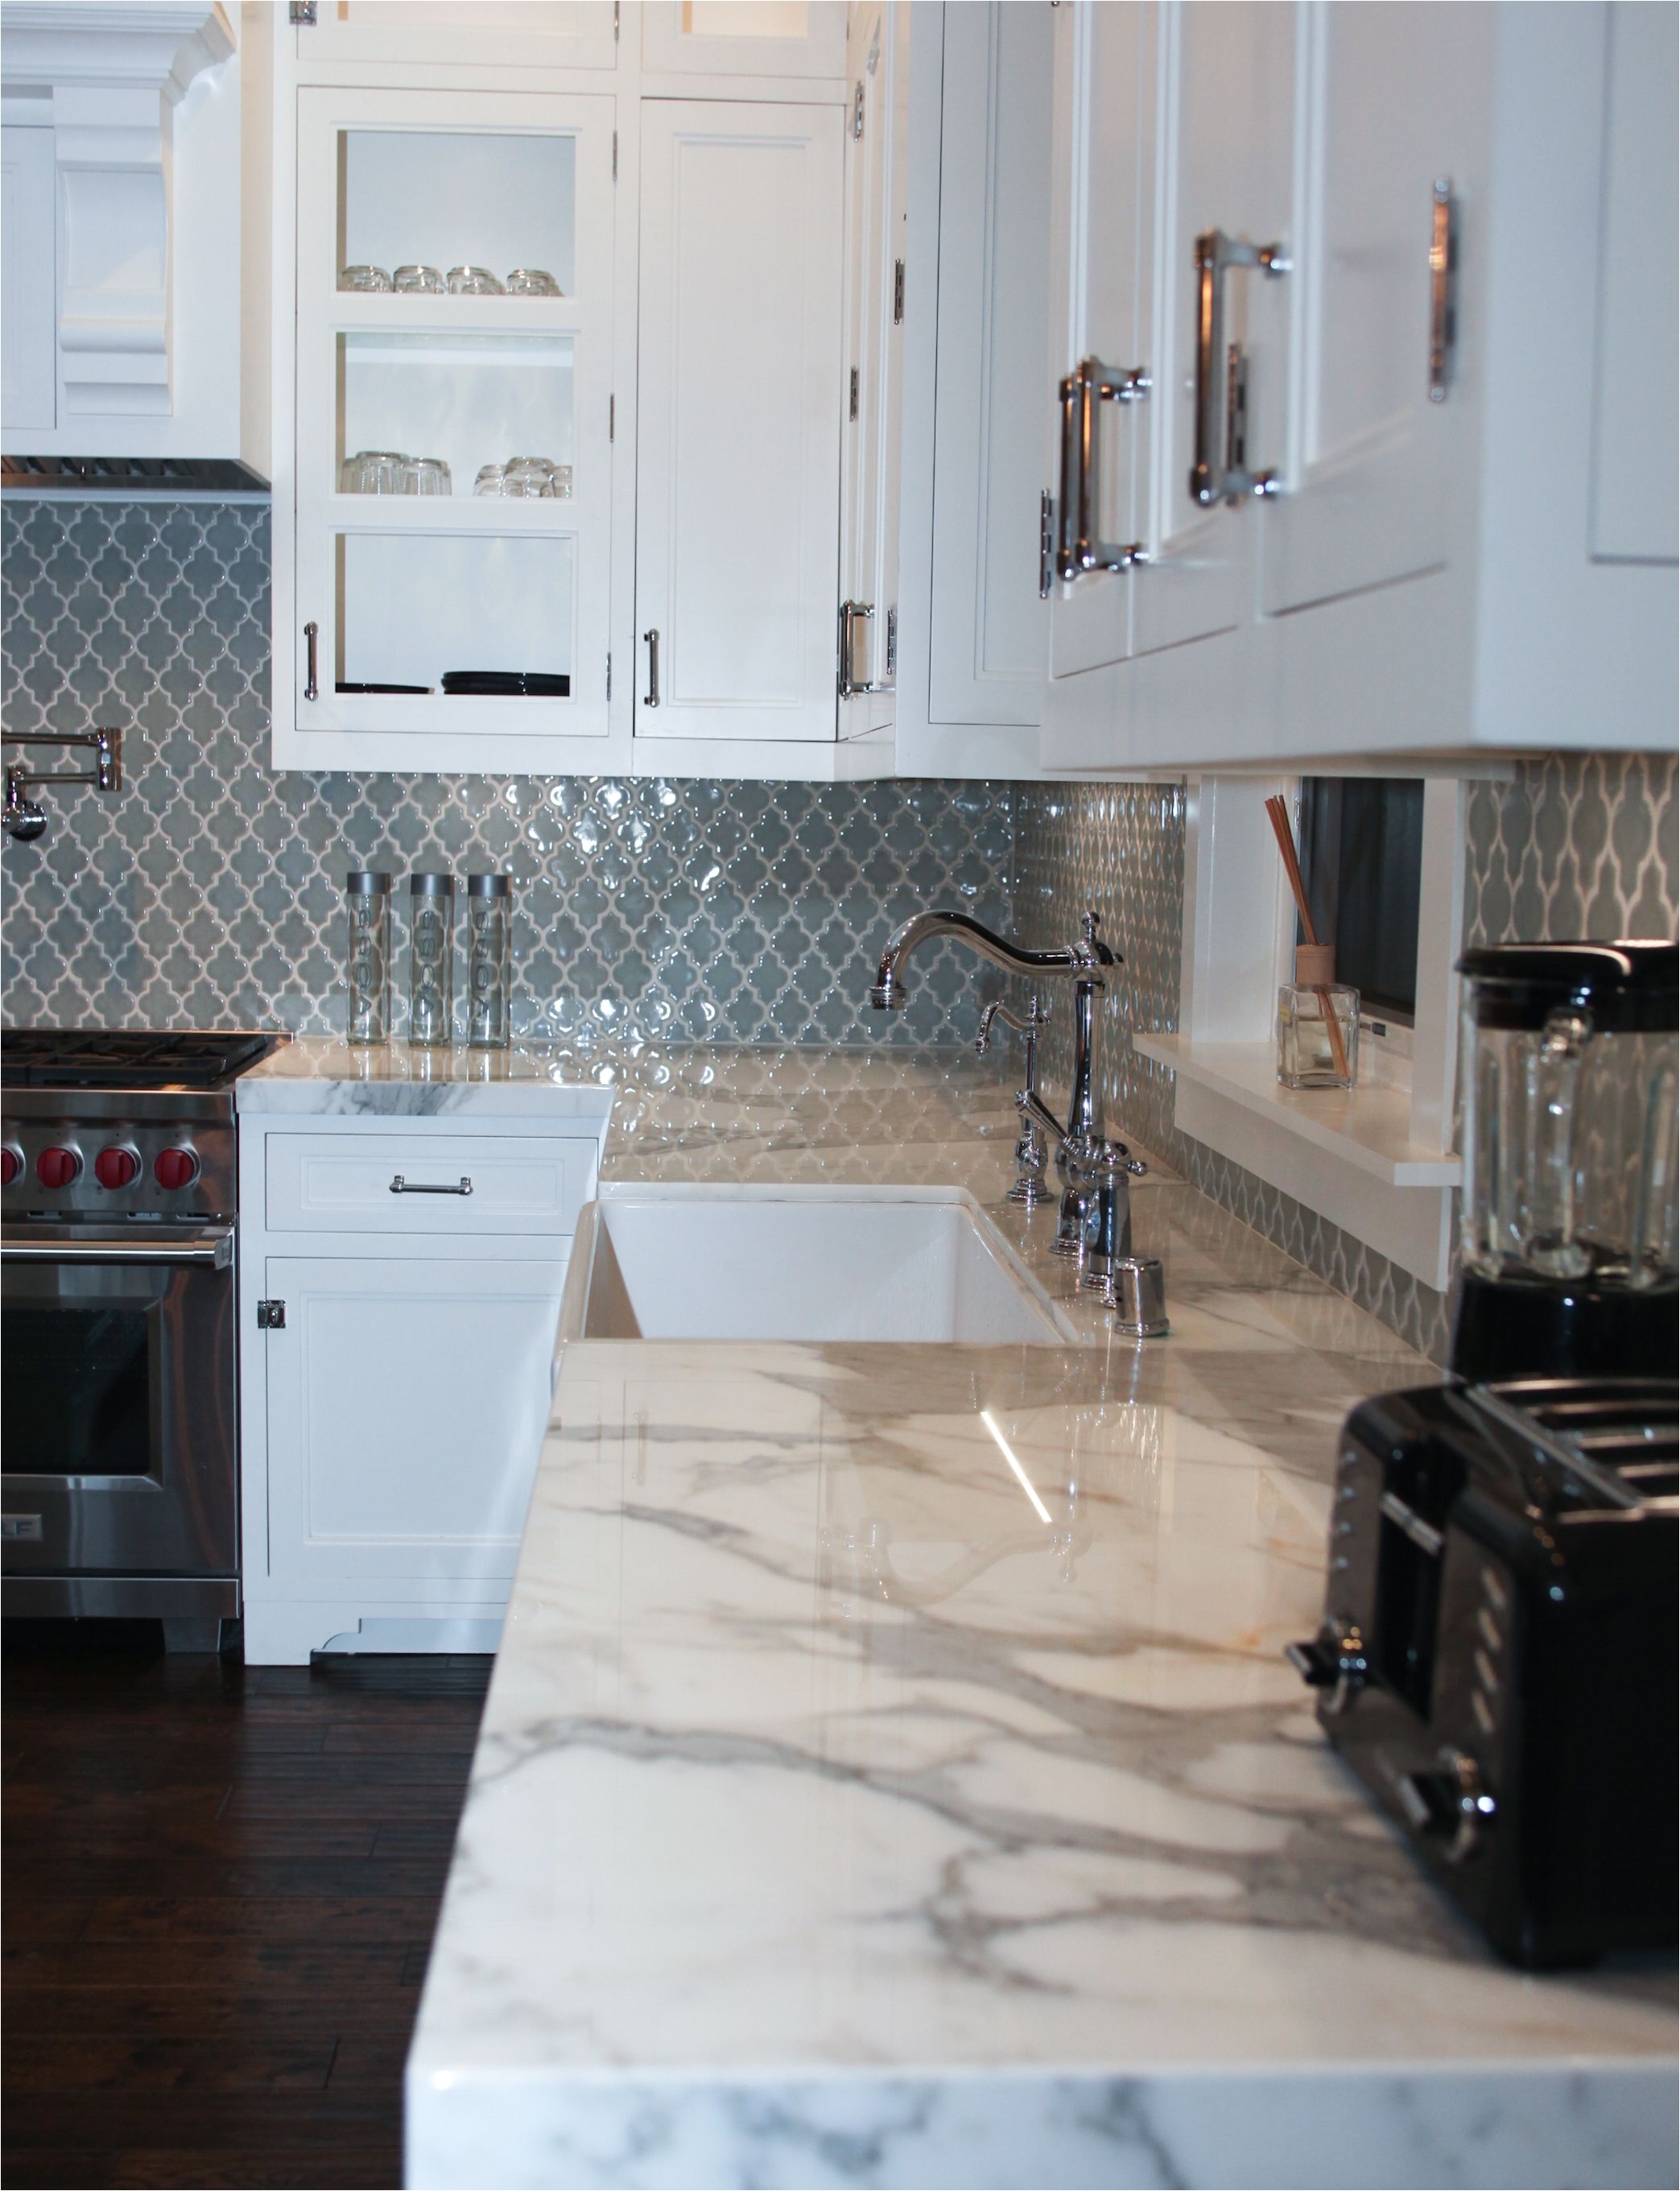 bluish grayish moroccan style tiles for the backsplash with calcutta marble countertops by mesa designs 310 955 6349